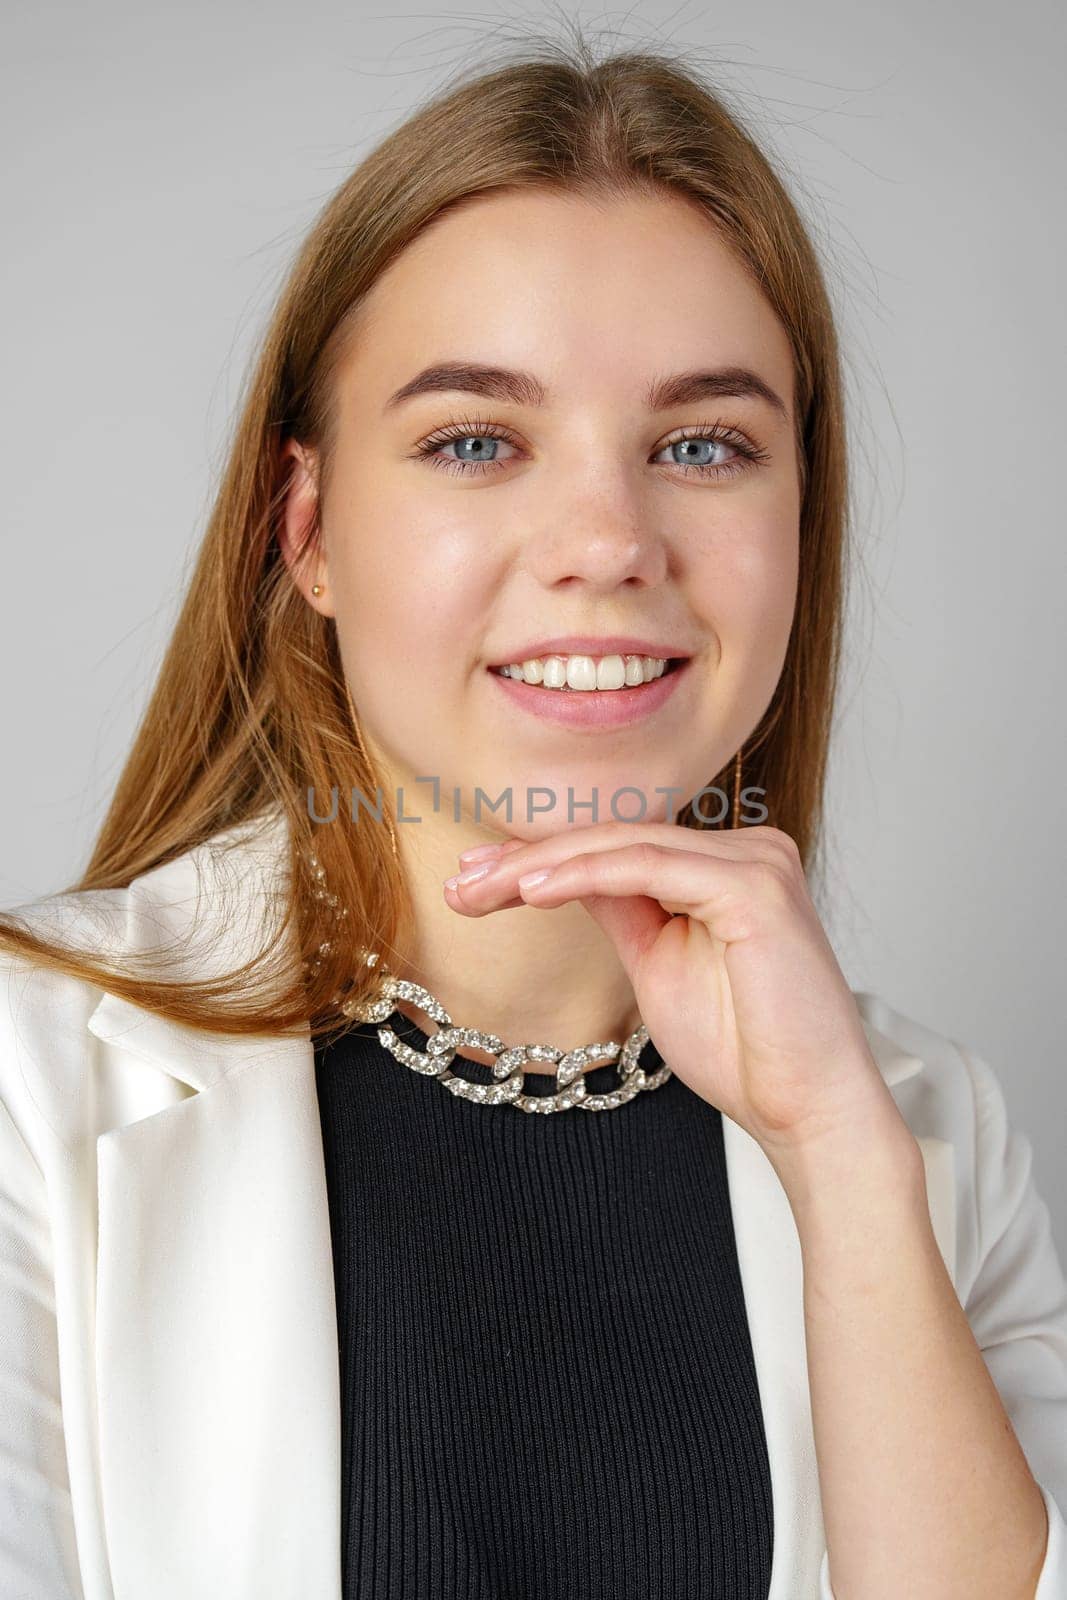 Woman in Black Top and White Jacket Posing in Studio close up